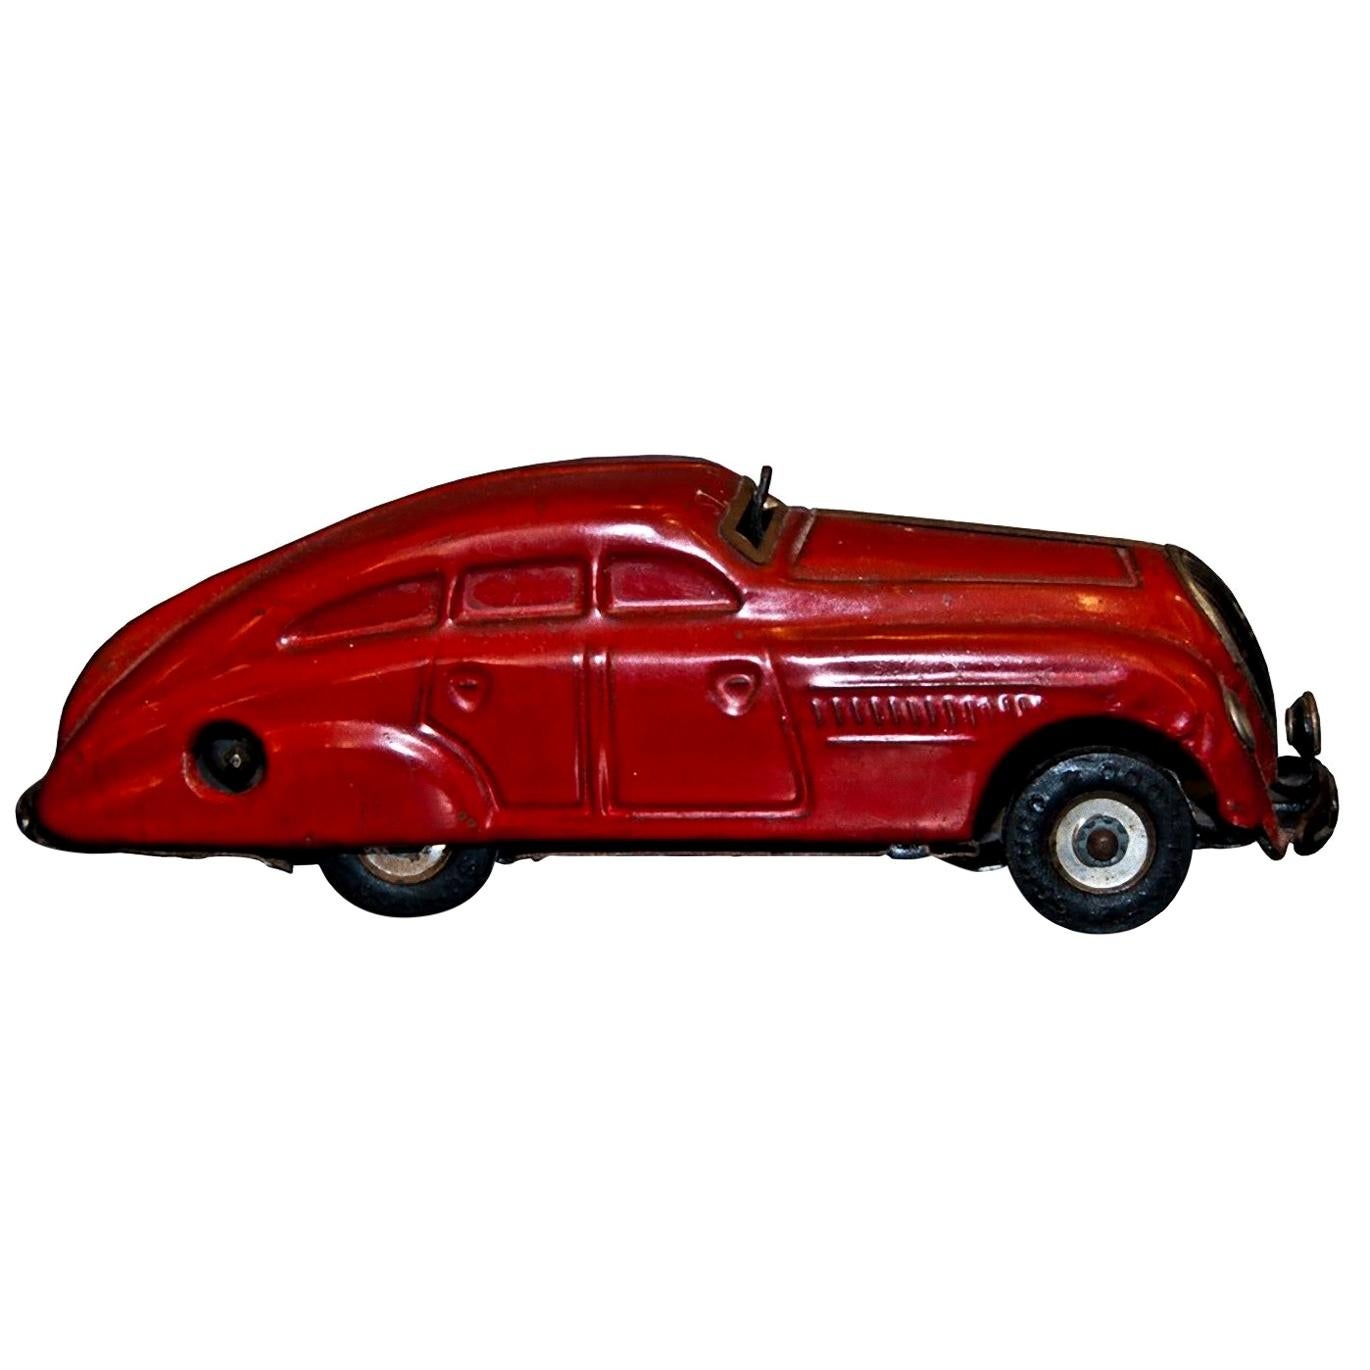 Vintage Toy, Schuco 1750 Car, Made in Germany, Mid-20th Century For Sale